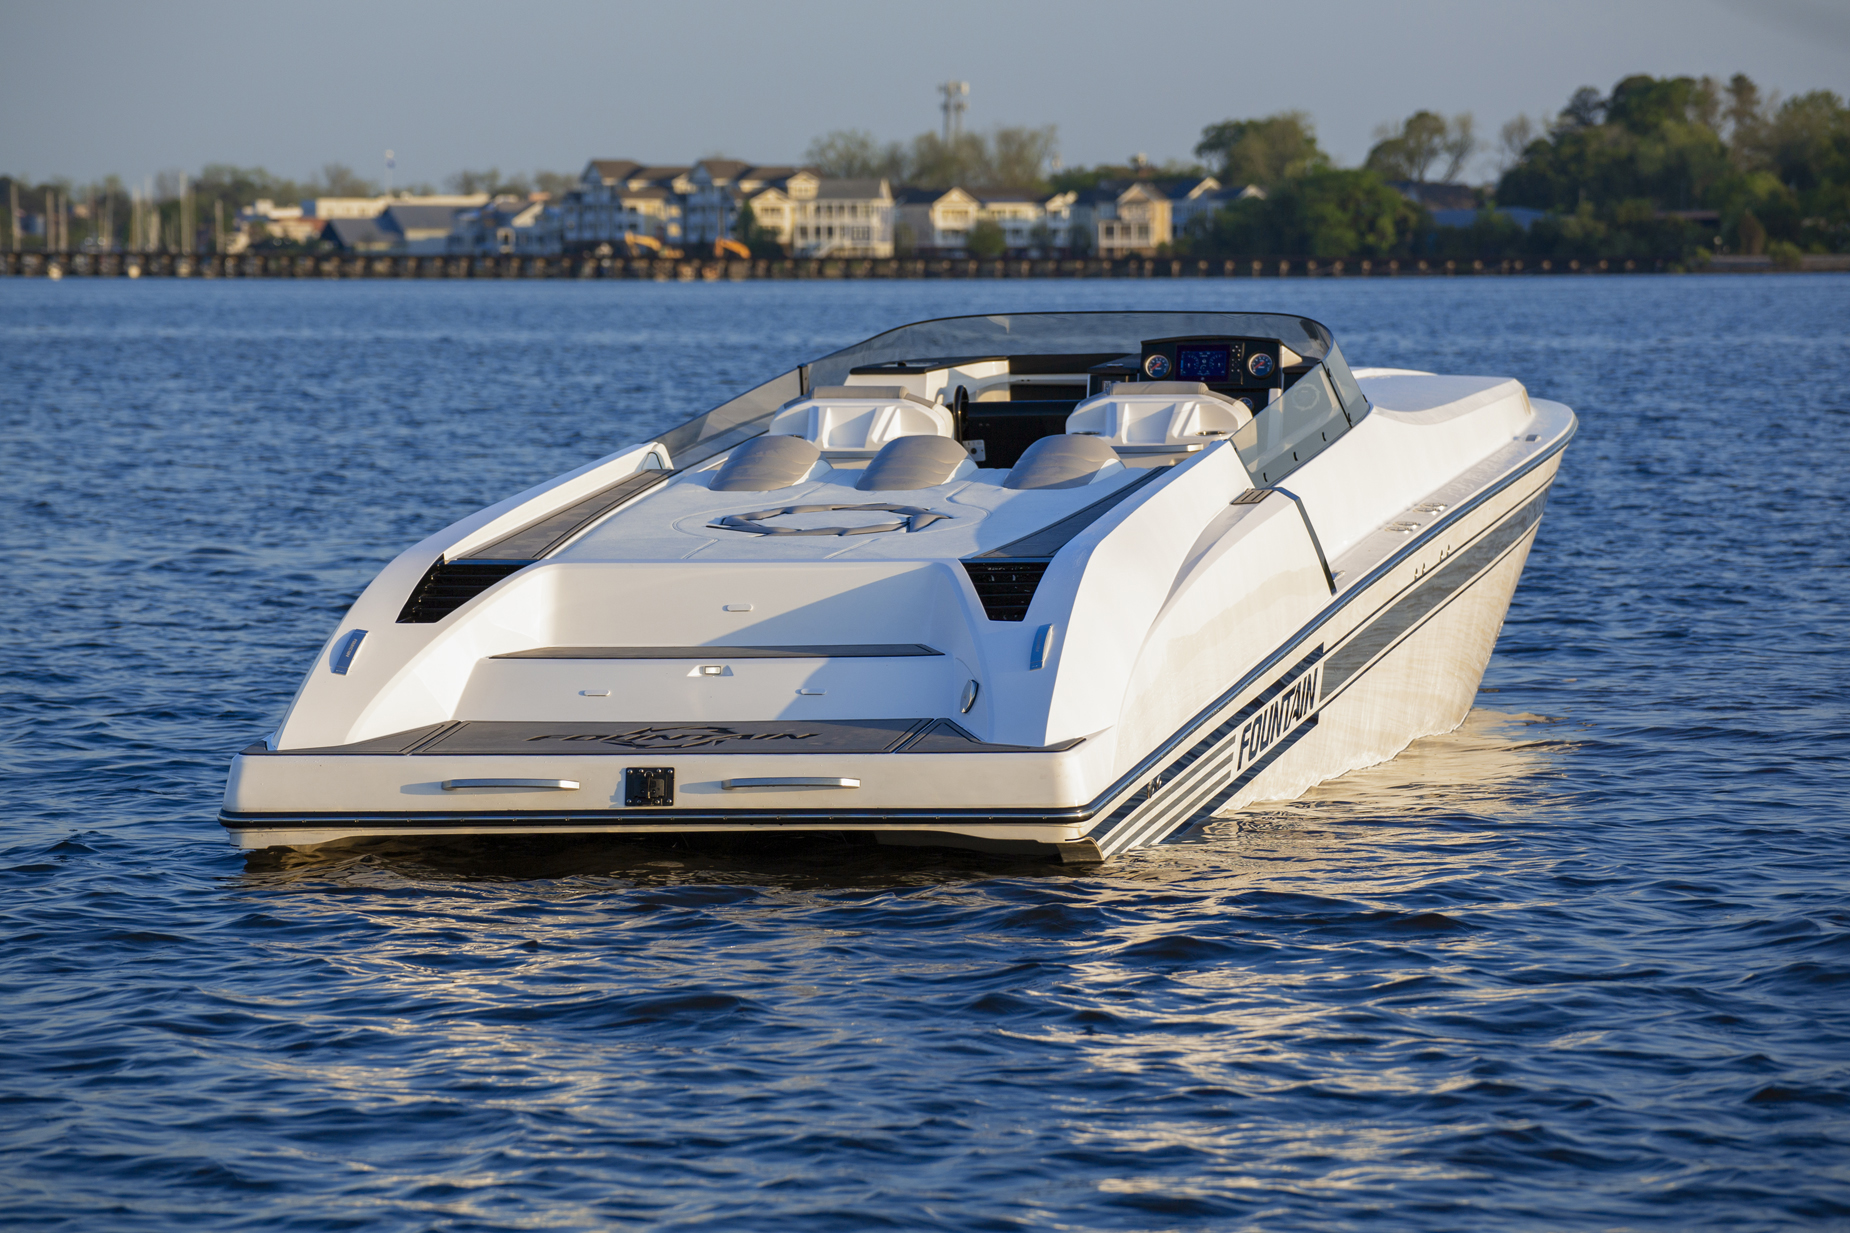 fountain powerboat dealers